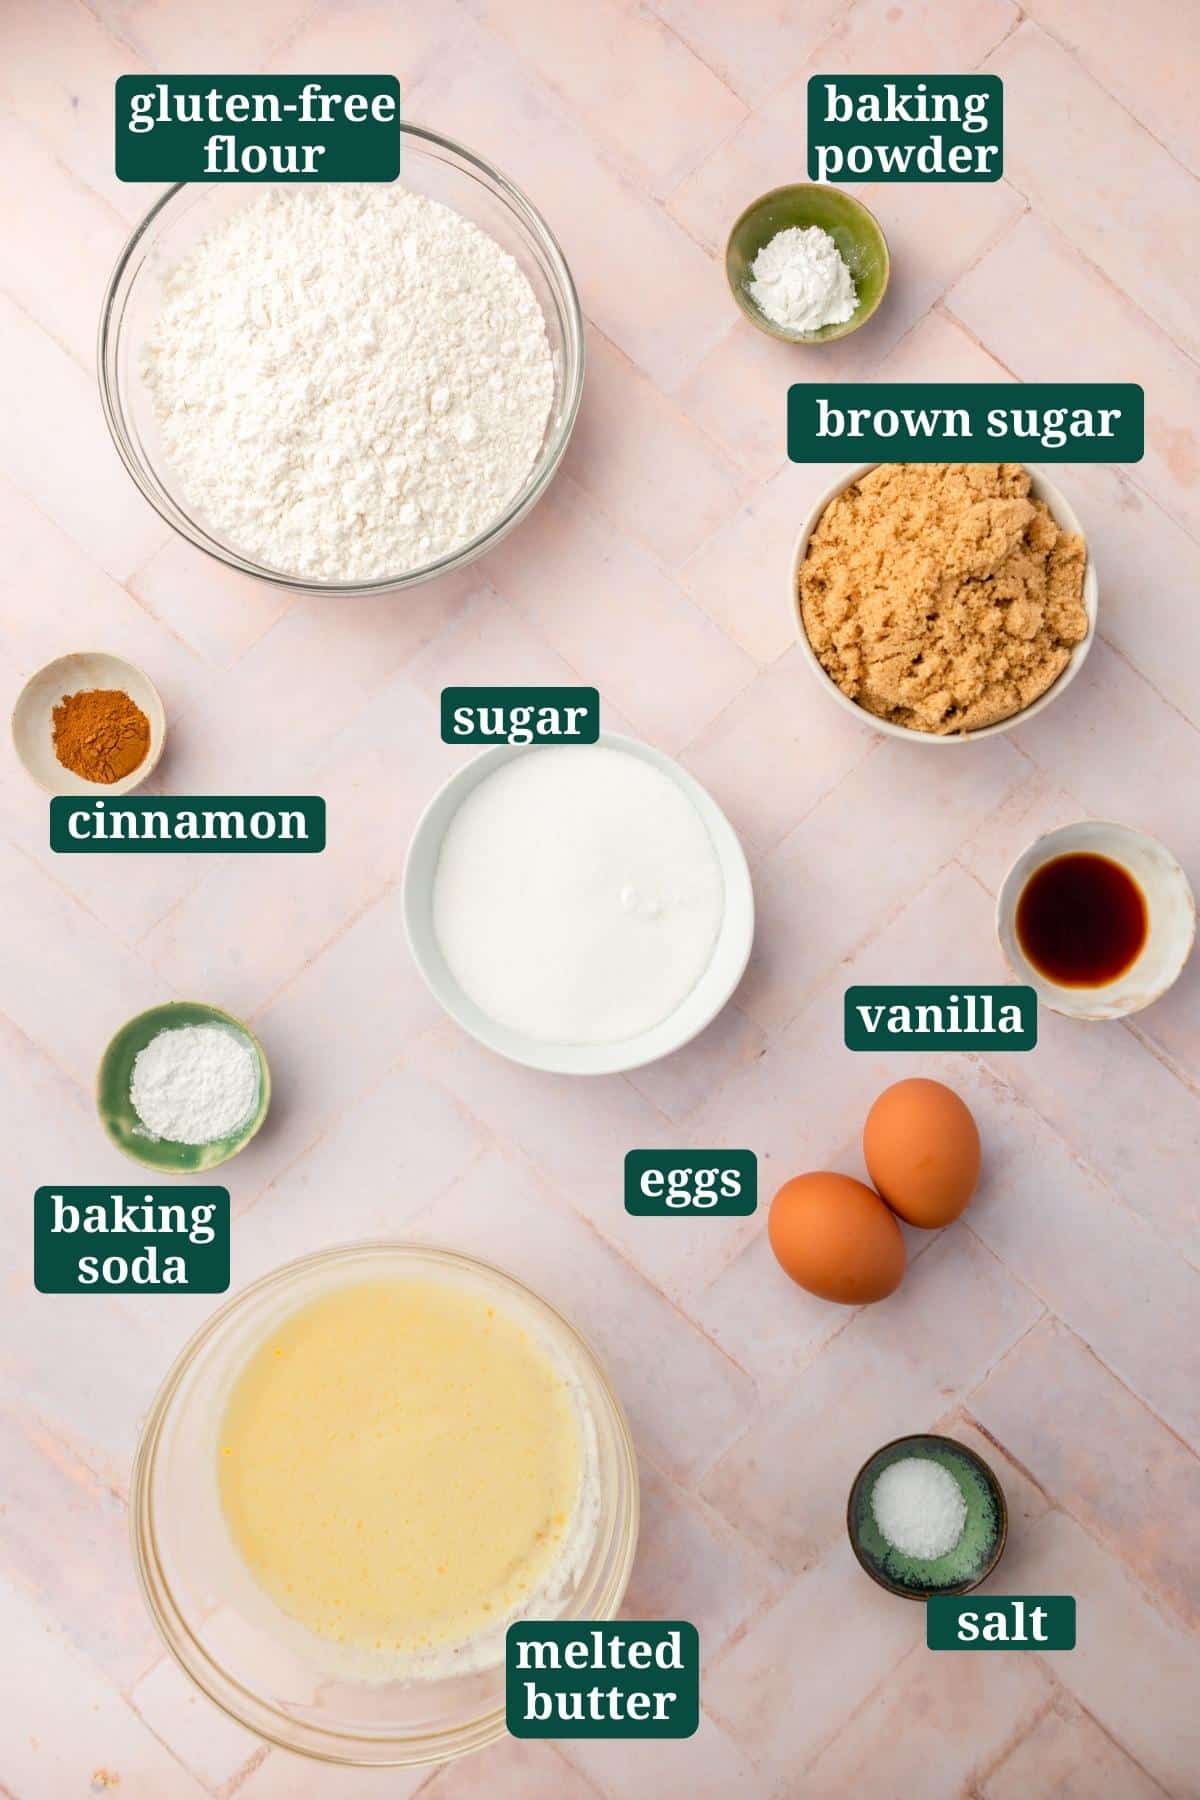 Small bowls of ingredients on a pink table to make gluten-free snickerdoodle bars, including gluten-free flour, baking powder, brown sugar, vanilla, sugar, cinnamon, baking soda, eggs, melted butter and salt with text overlays over each ingredient.